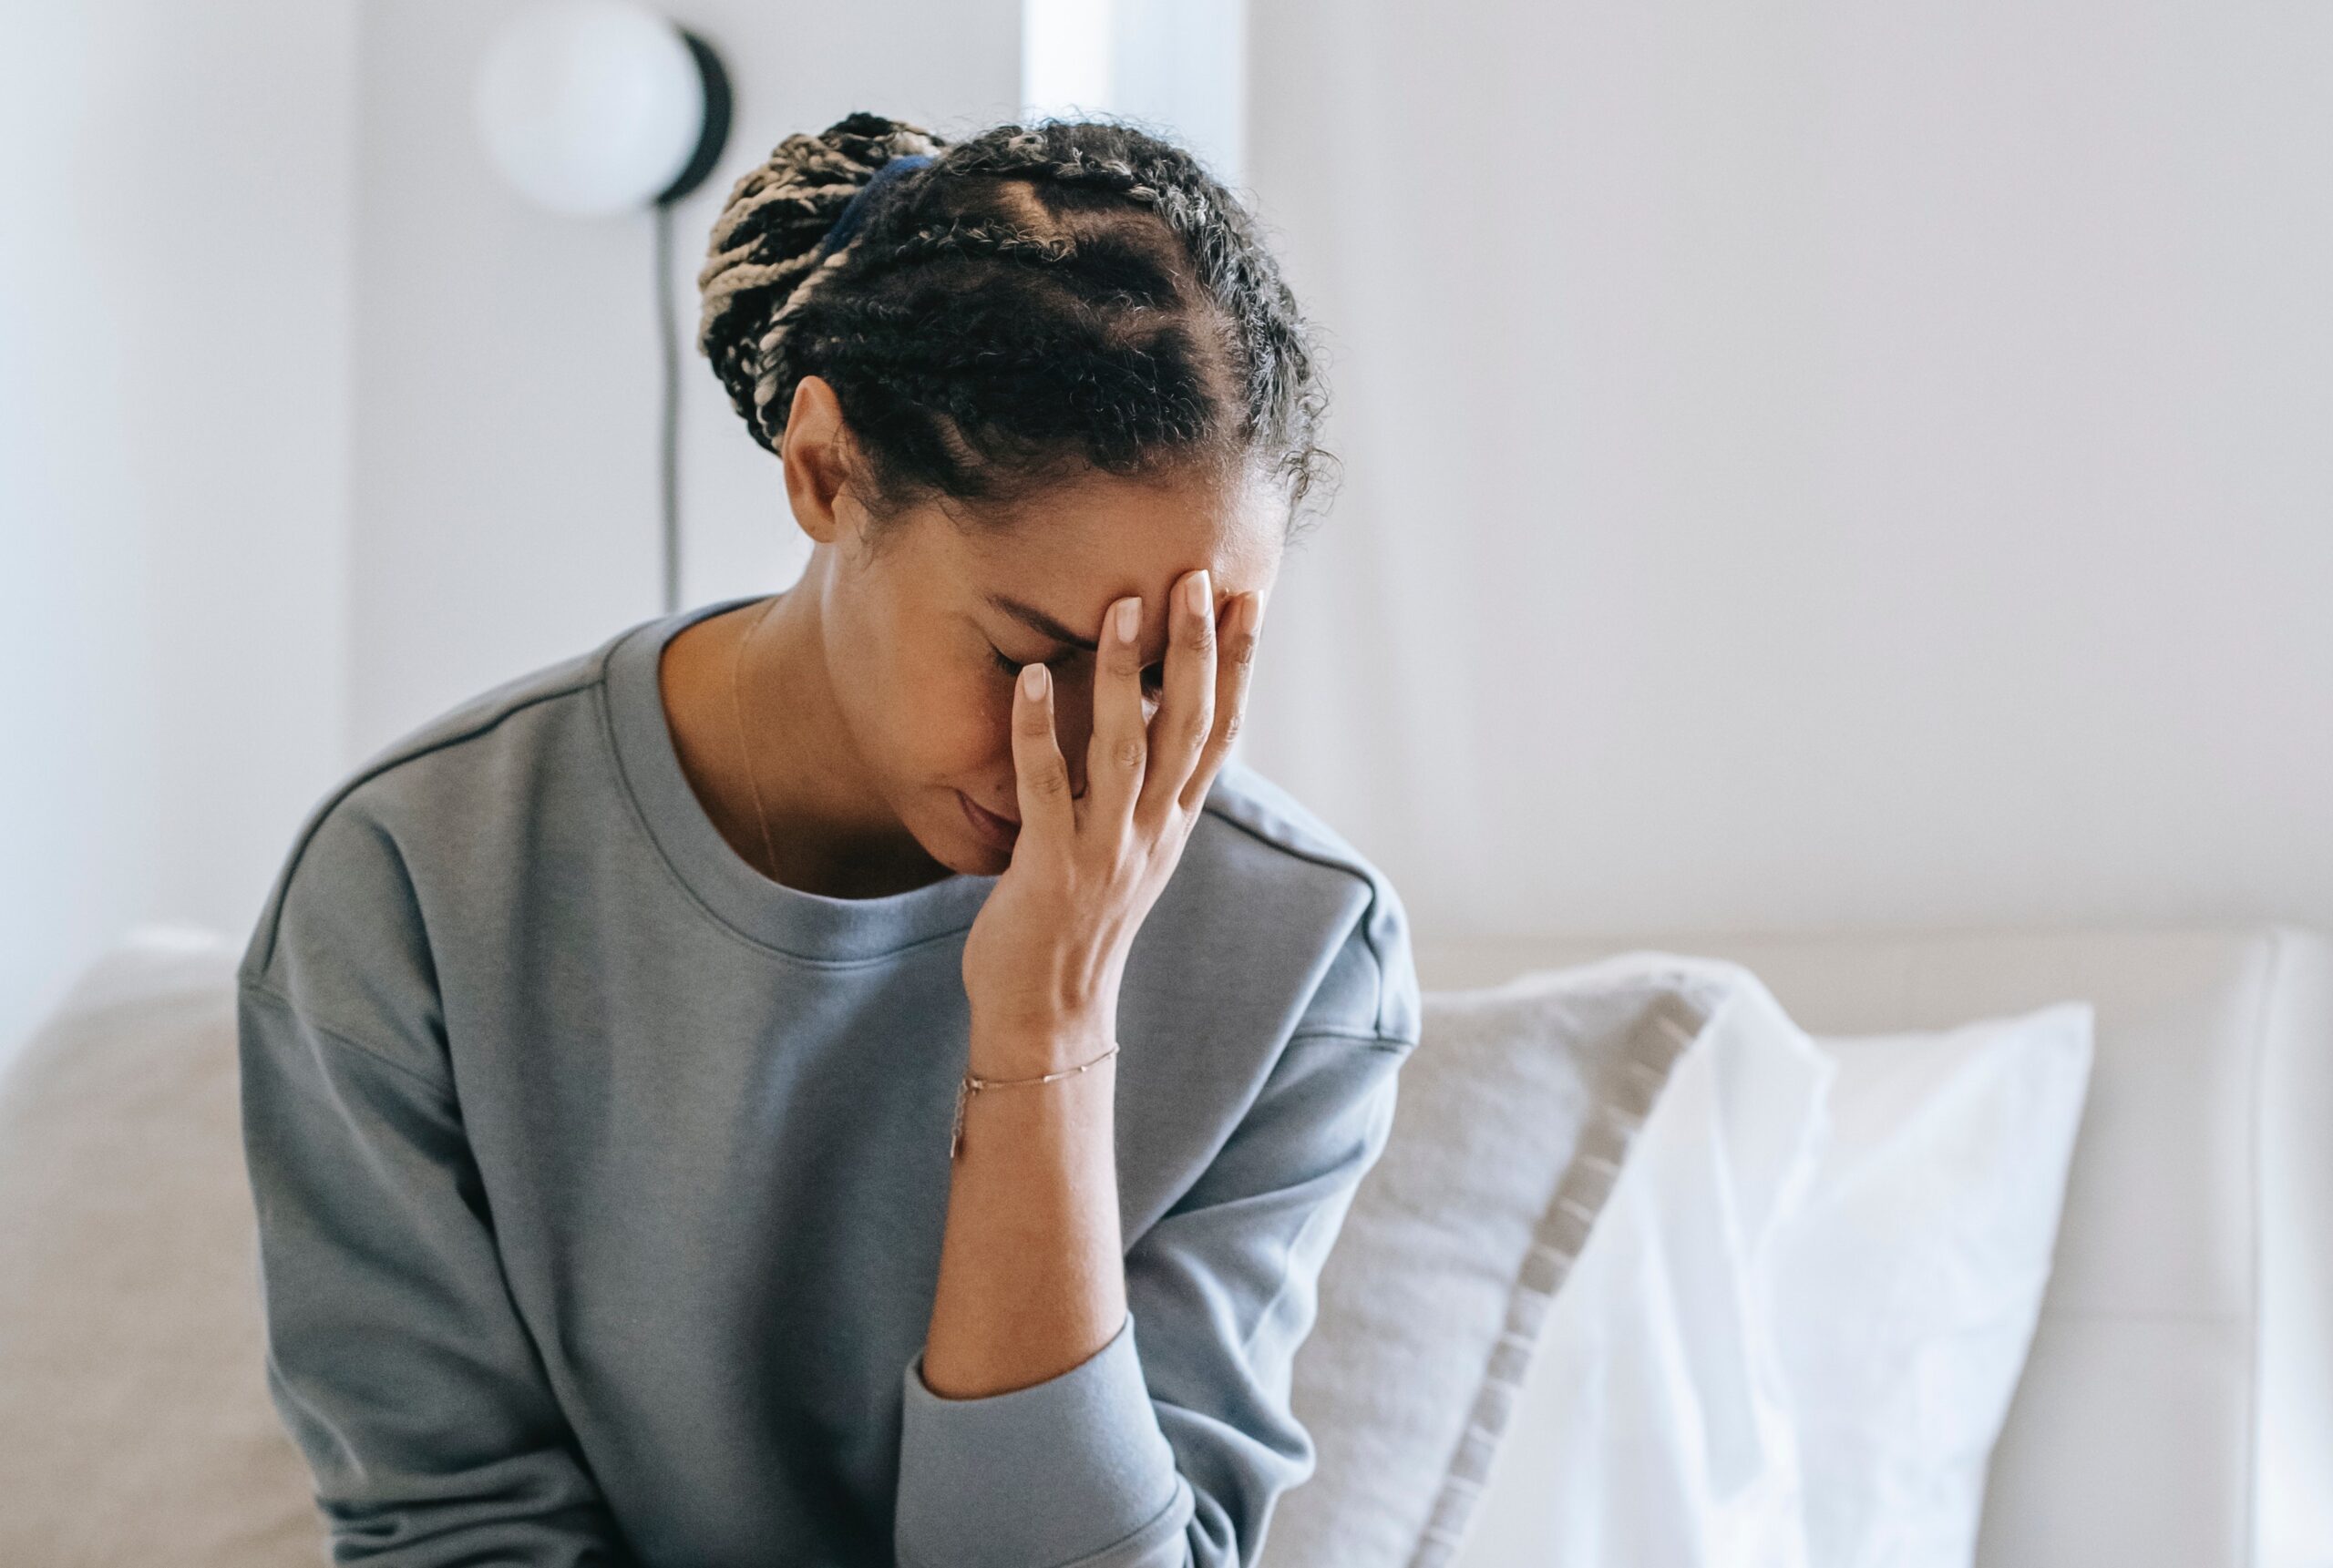 Will I be able to forgive myself after I have an abortion?